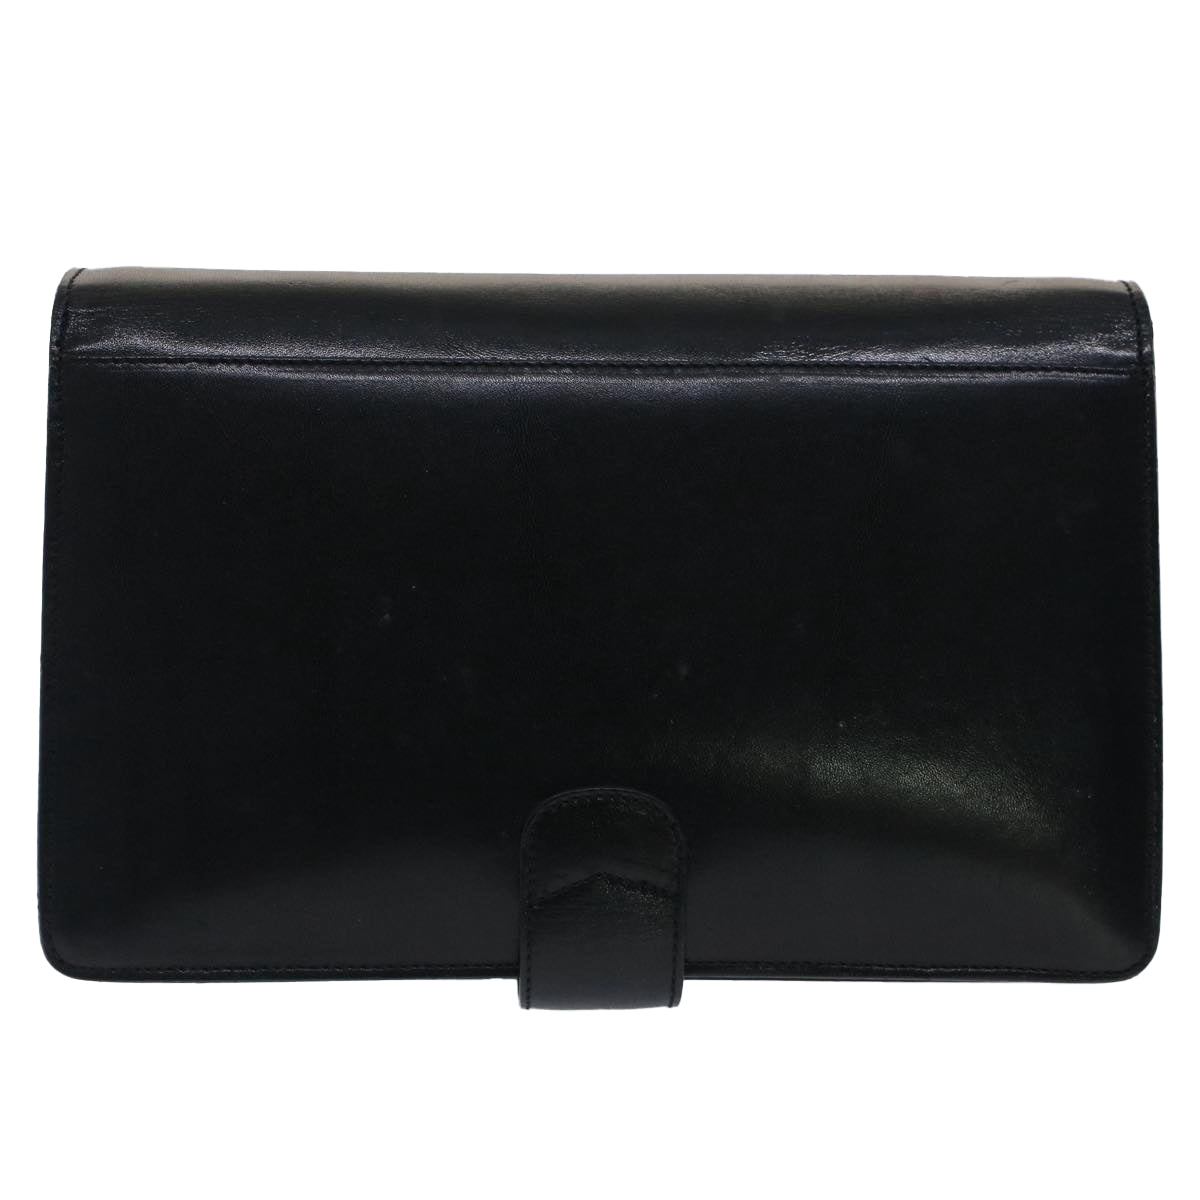 BALLY Clutch Bag Leather Black Auth bs7387 - 0